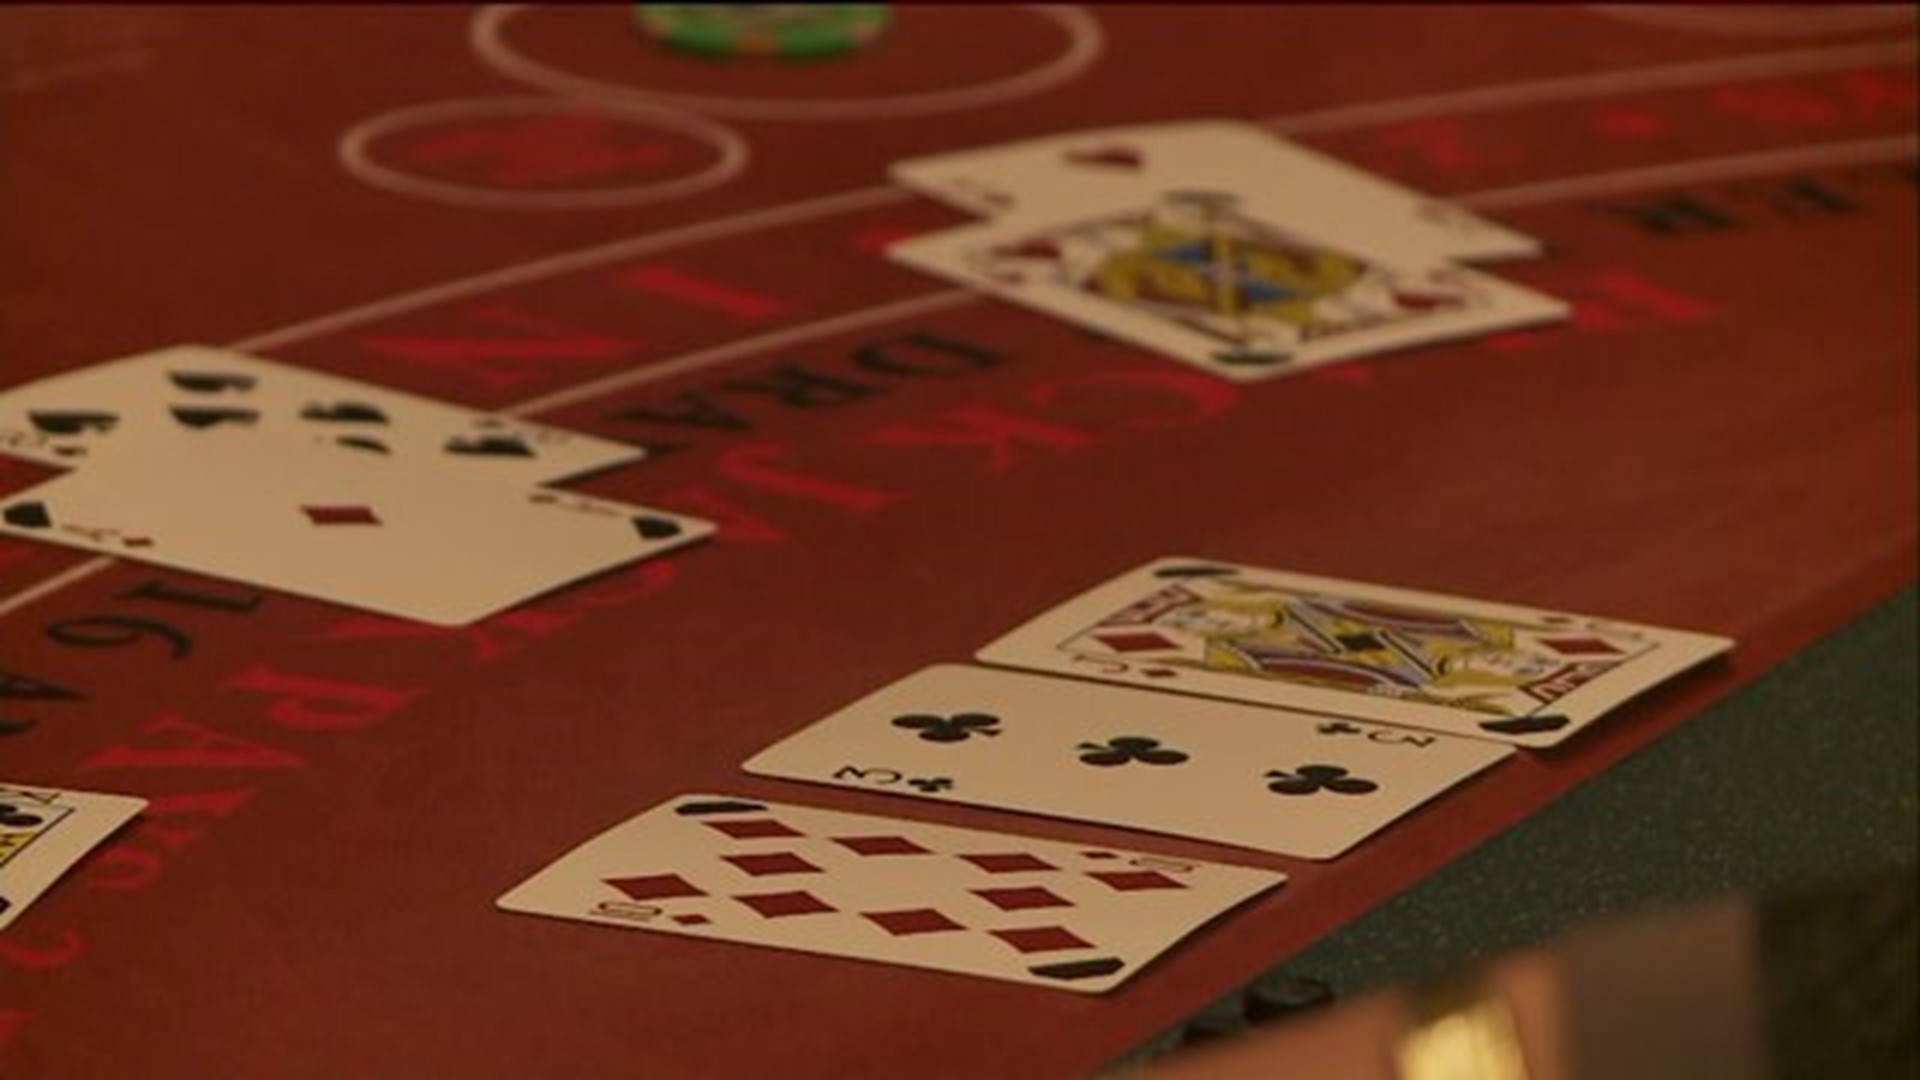 Windsor Locks residents discuss positives and negatives of possible casino